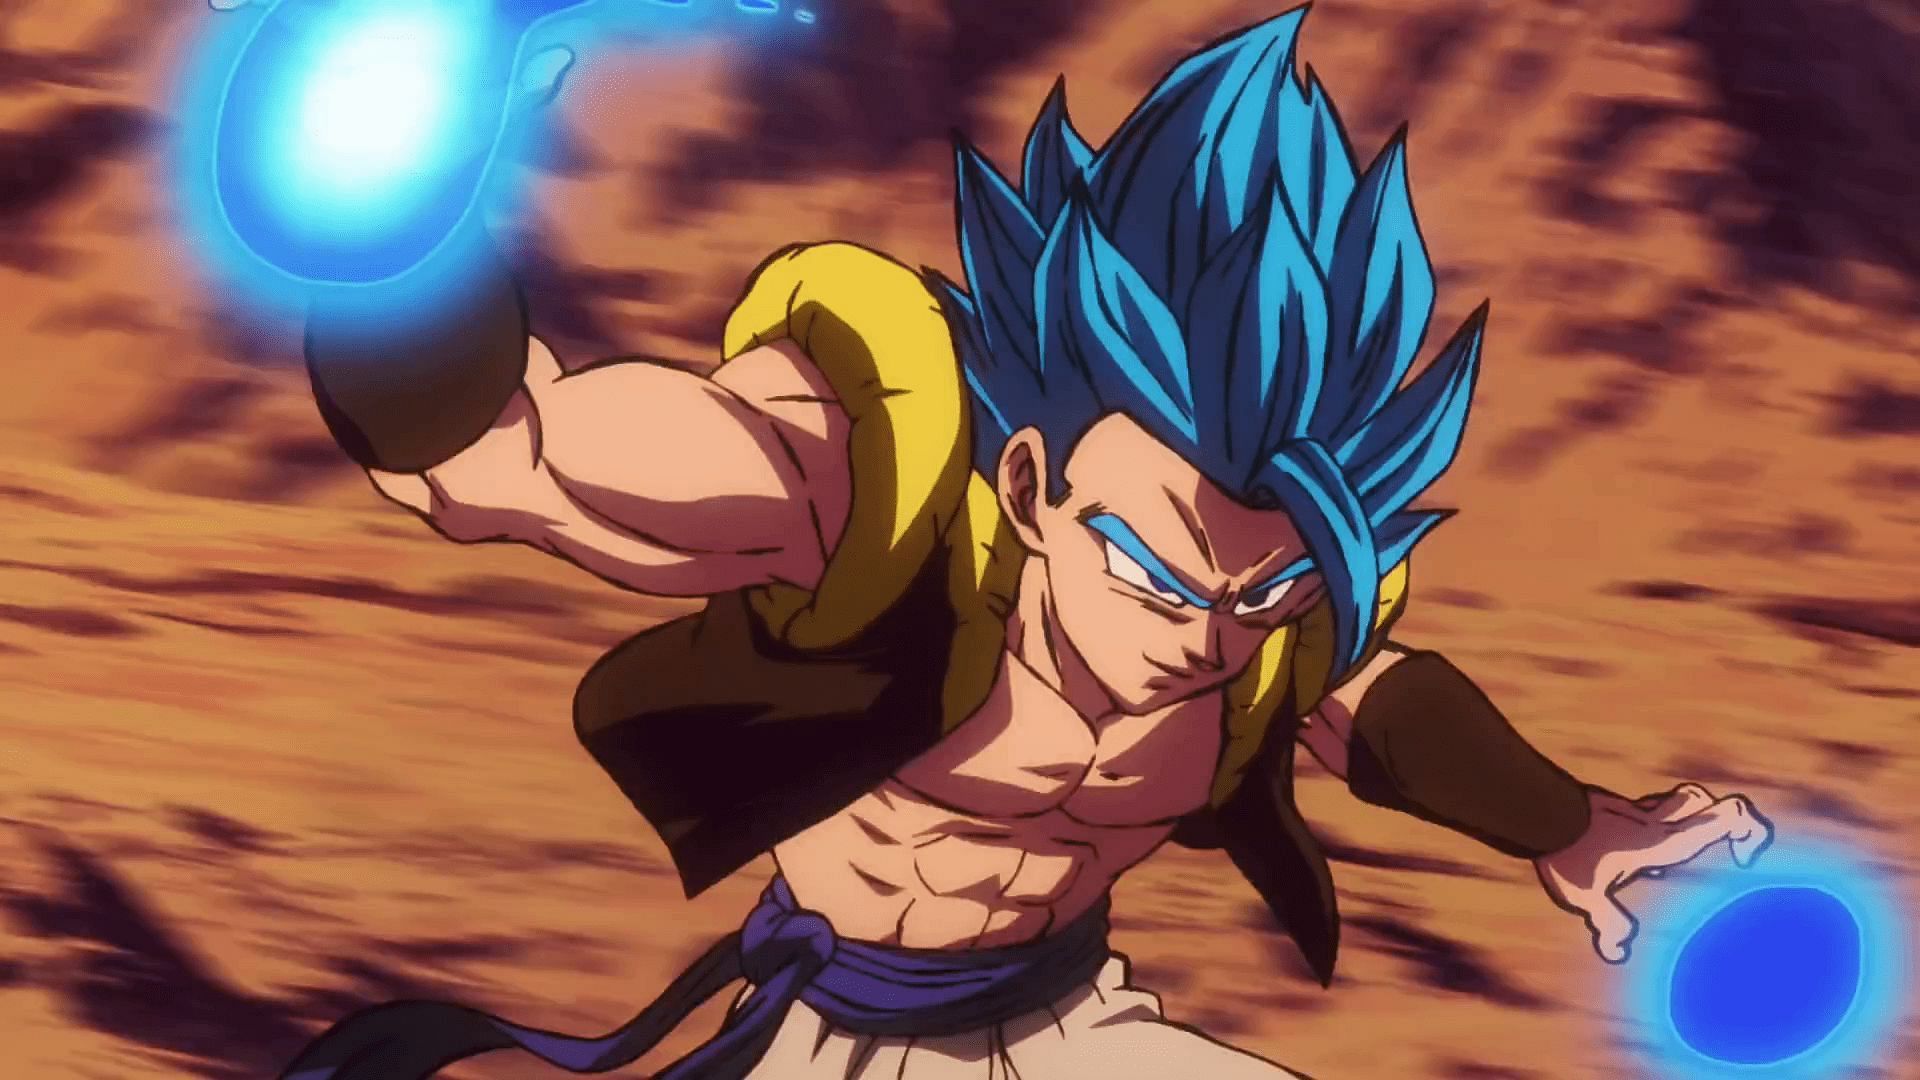 Gogeta as seen in the Dragon Ball Super: Broly film (Image via Toei Animation)